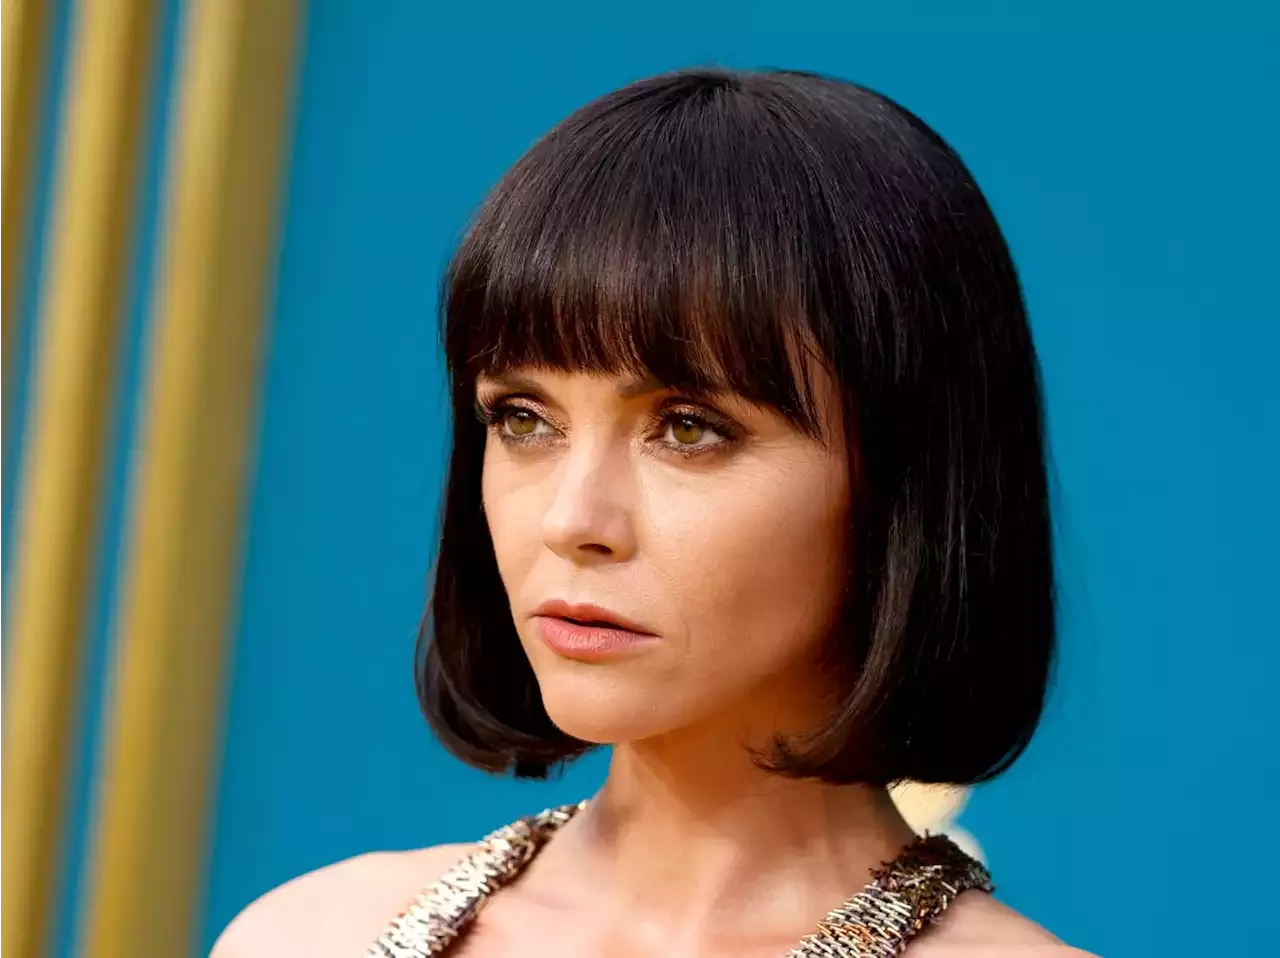 Christina Ricci - Christina Ricci says being a child star was an 'escape' from 'horrendous  childhood'